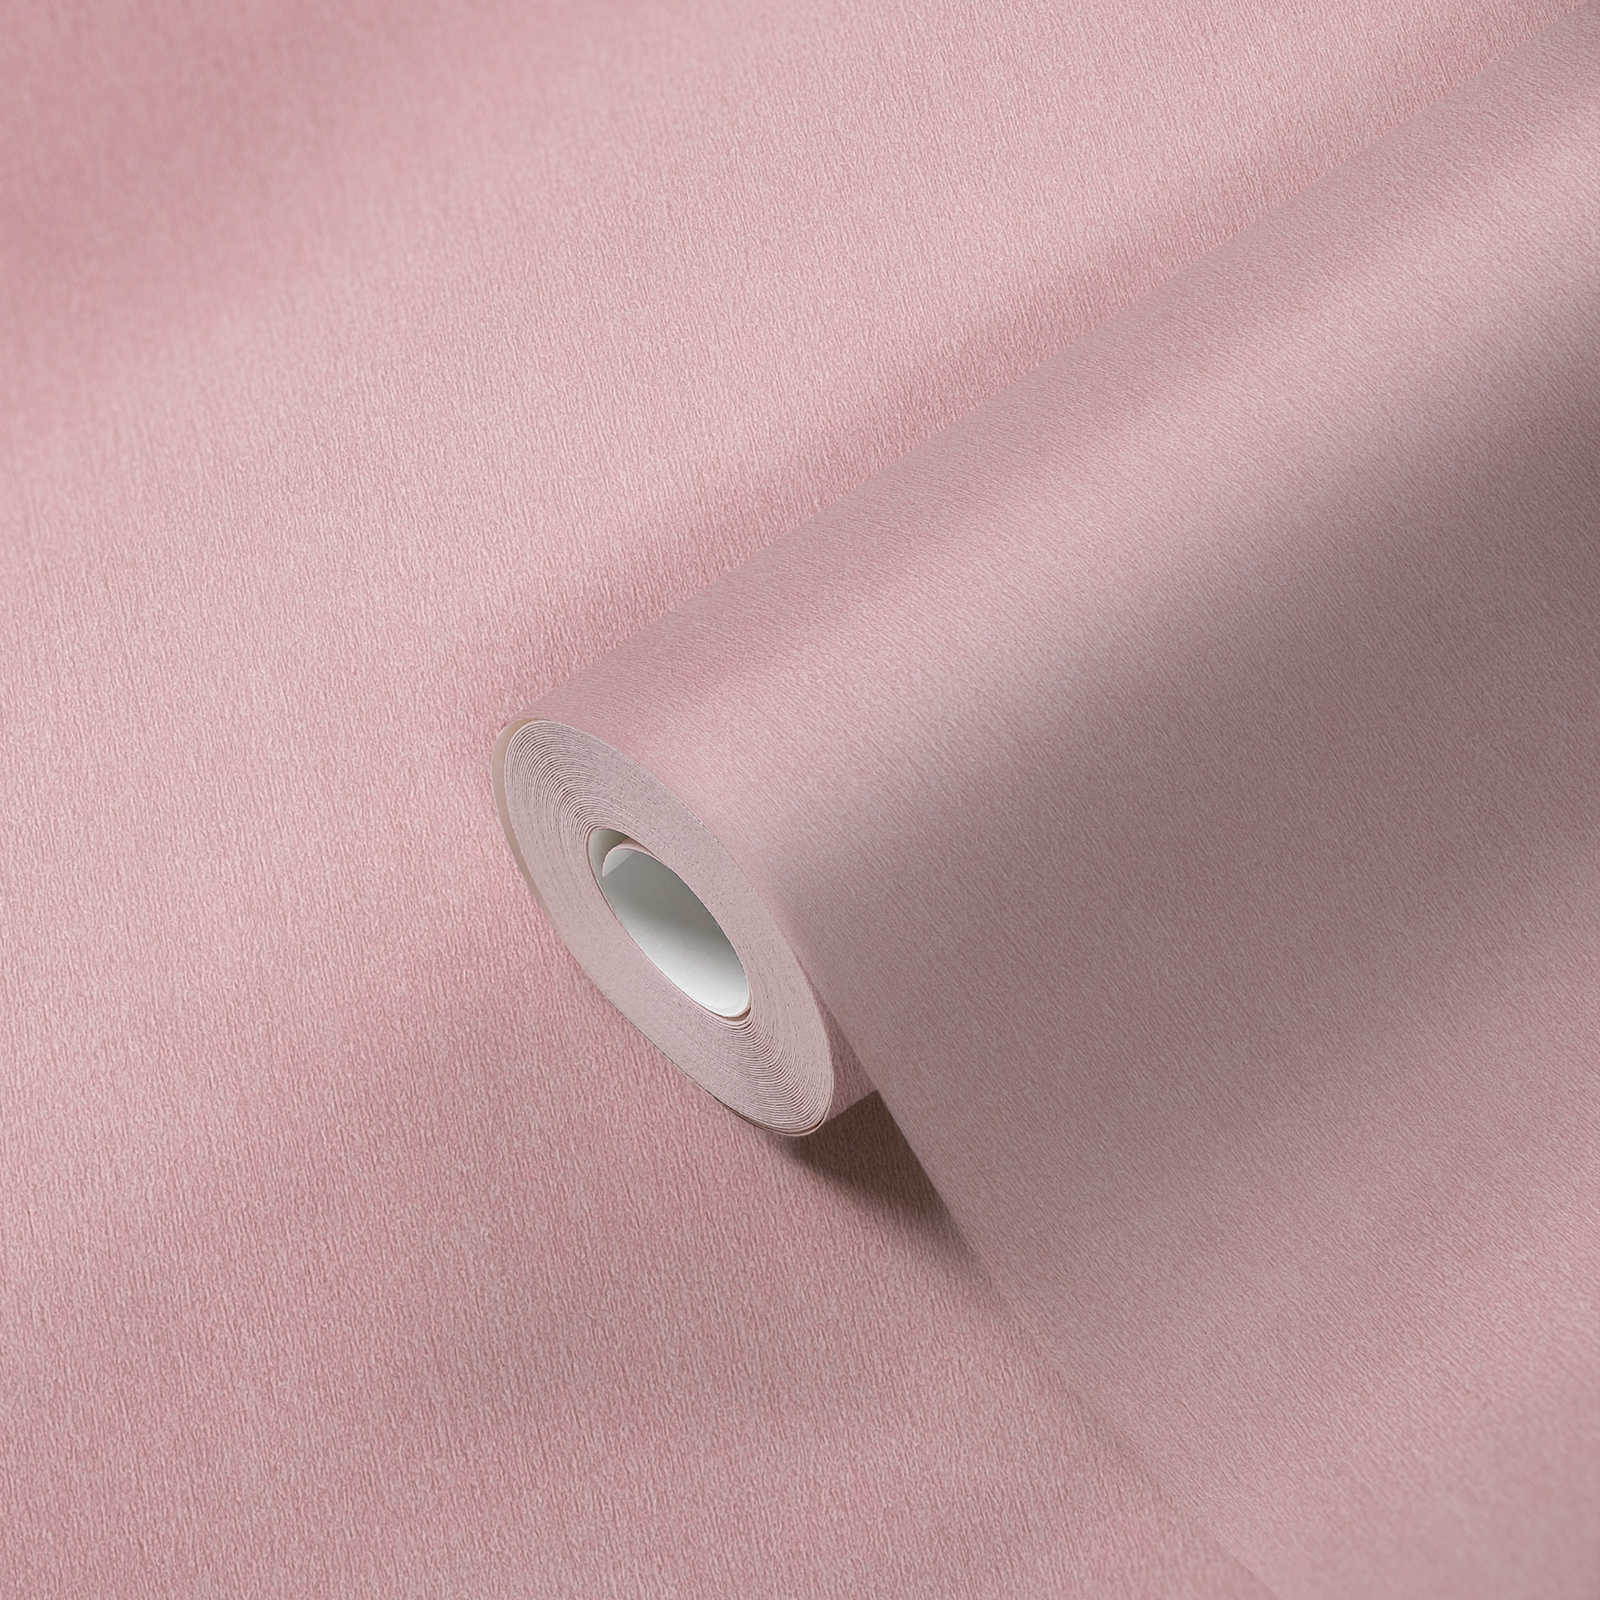             Pink wallpaper plain with colour hatching
        